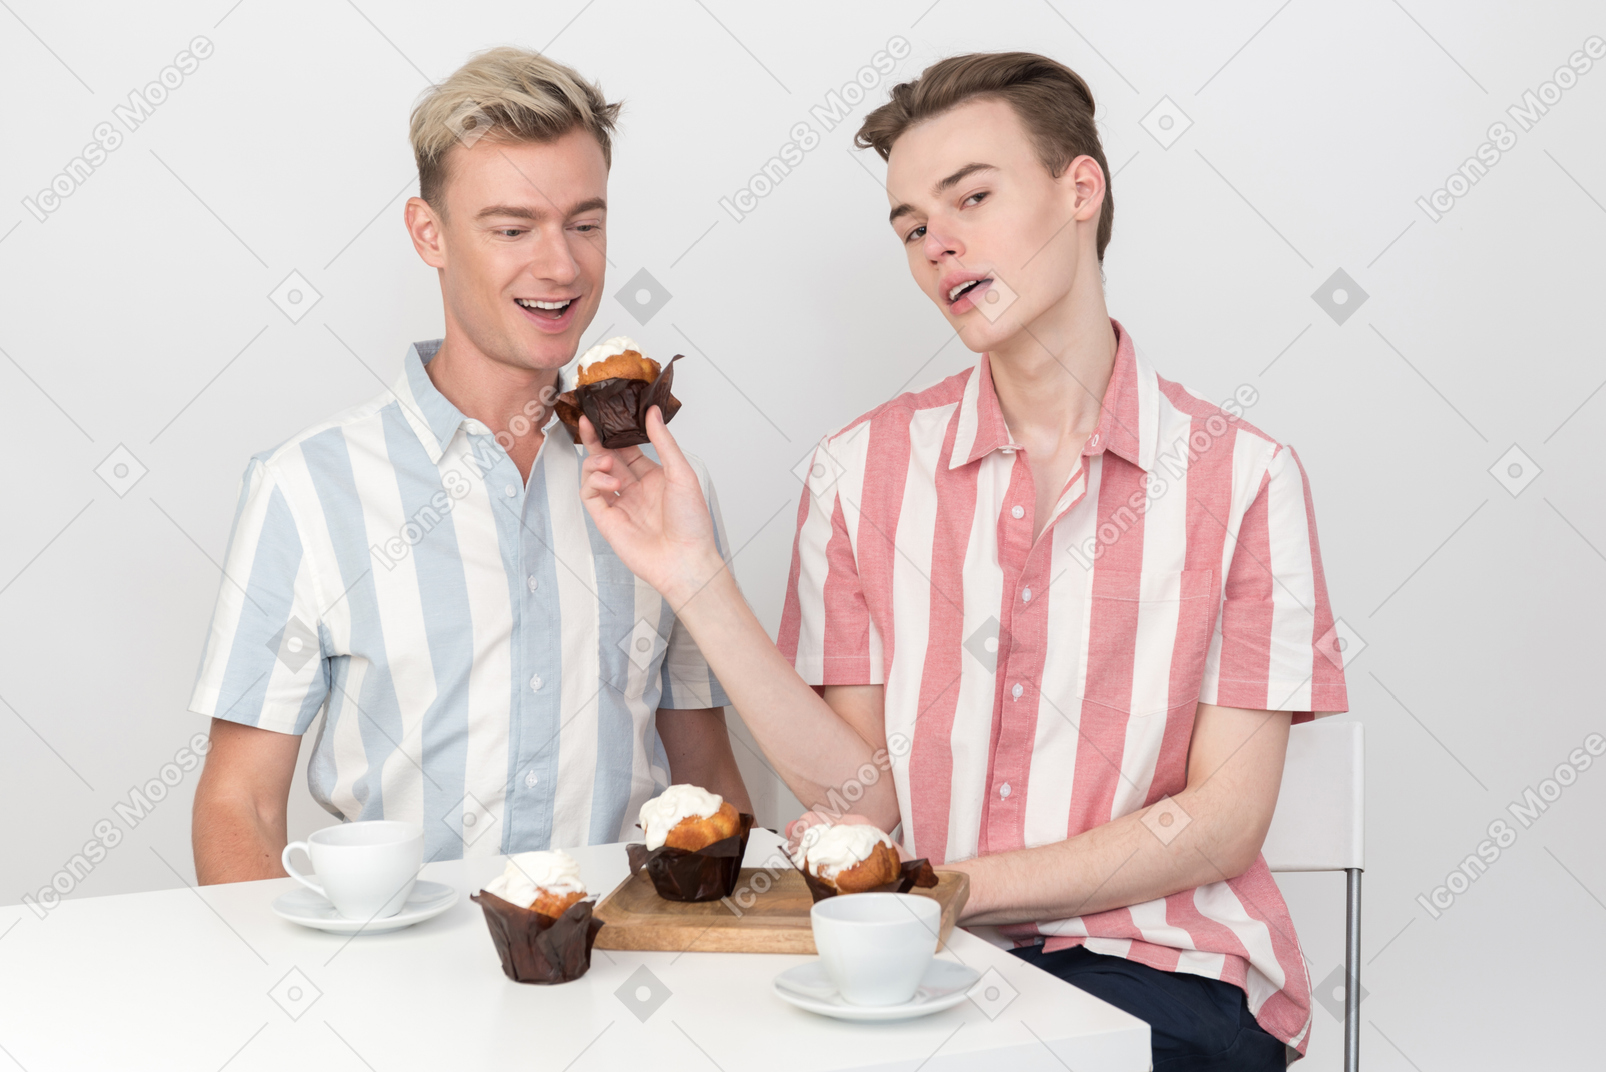 Handsome young man giving a cupcake to his male partner